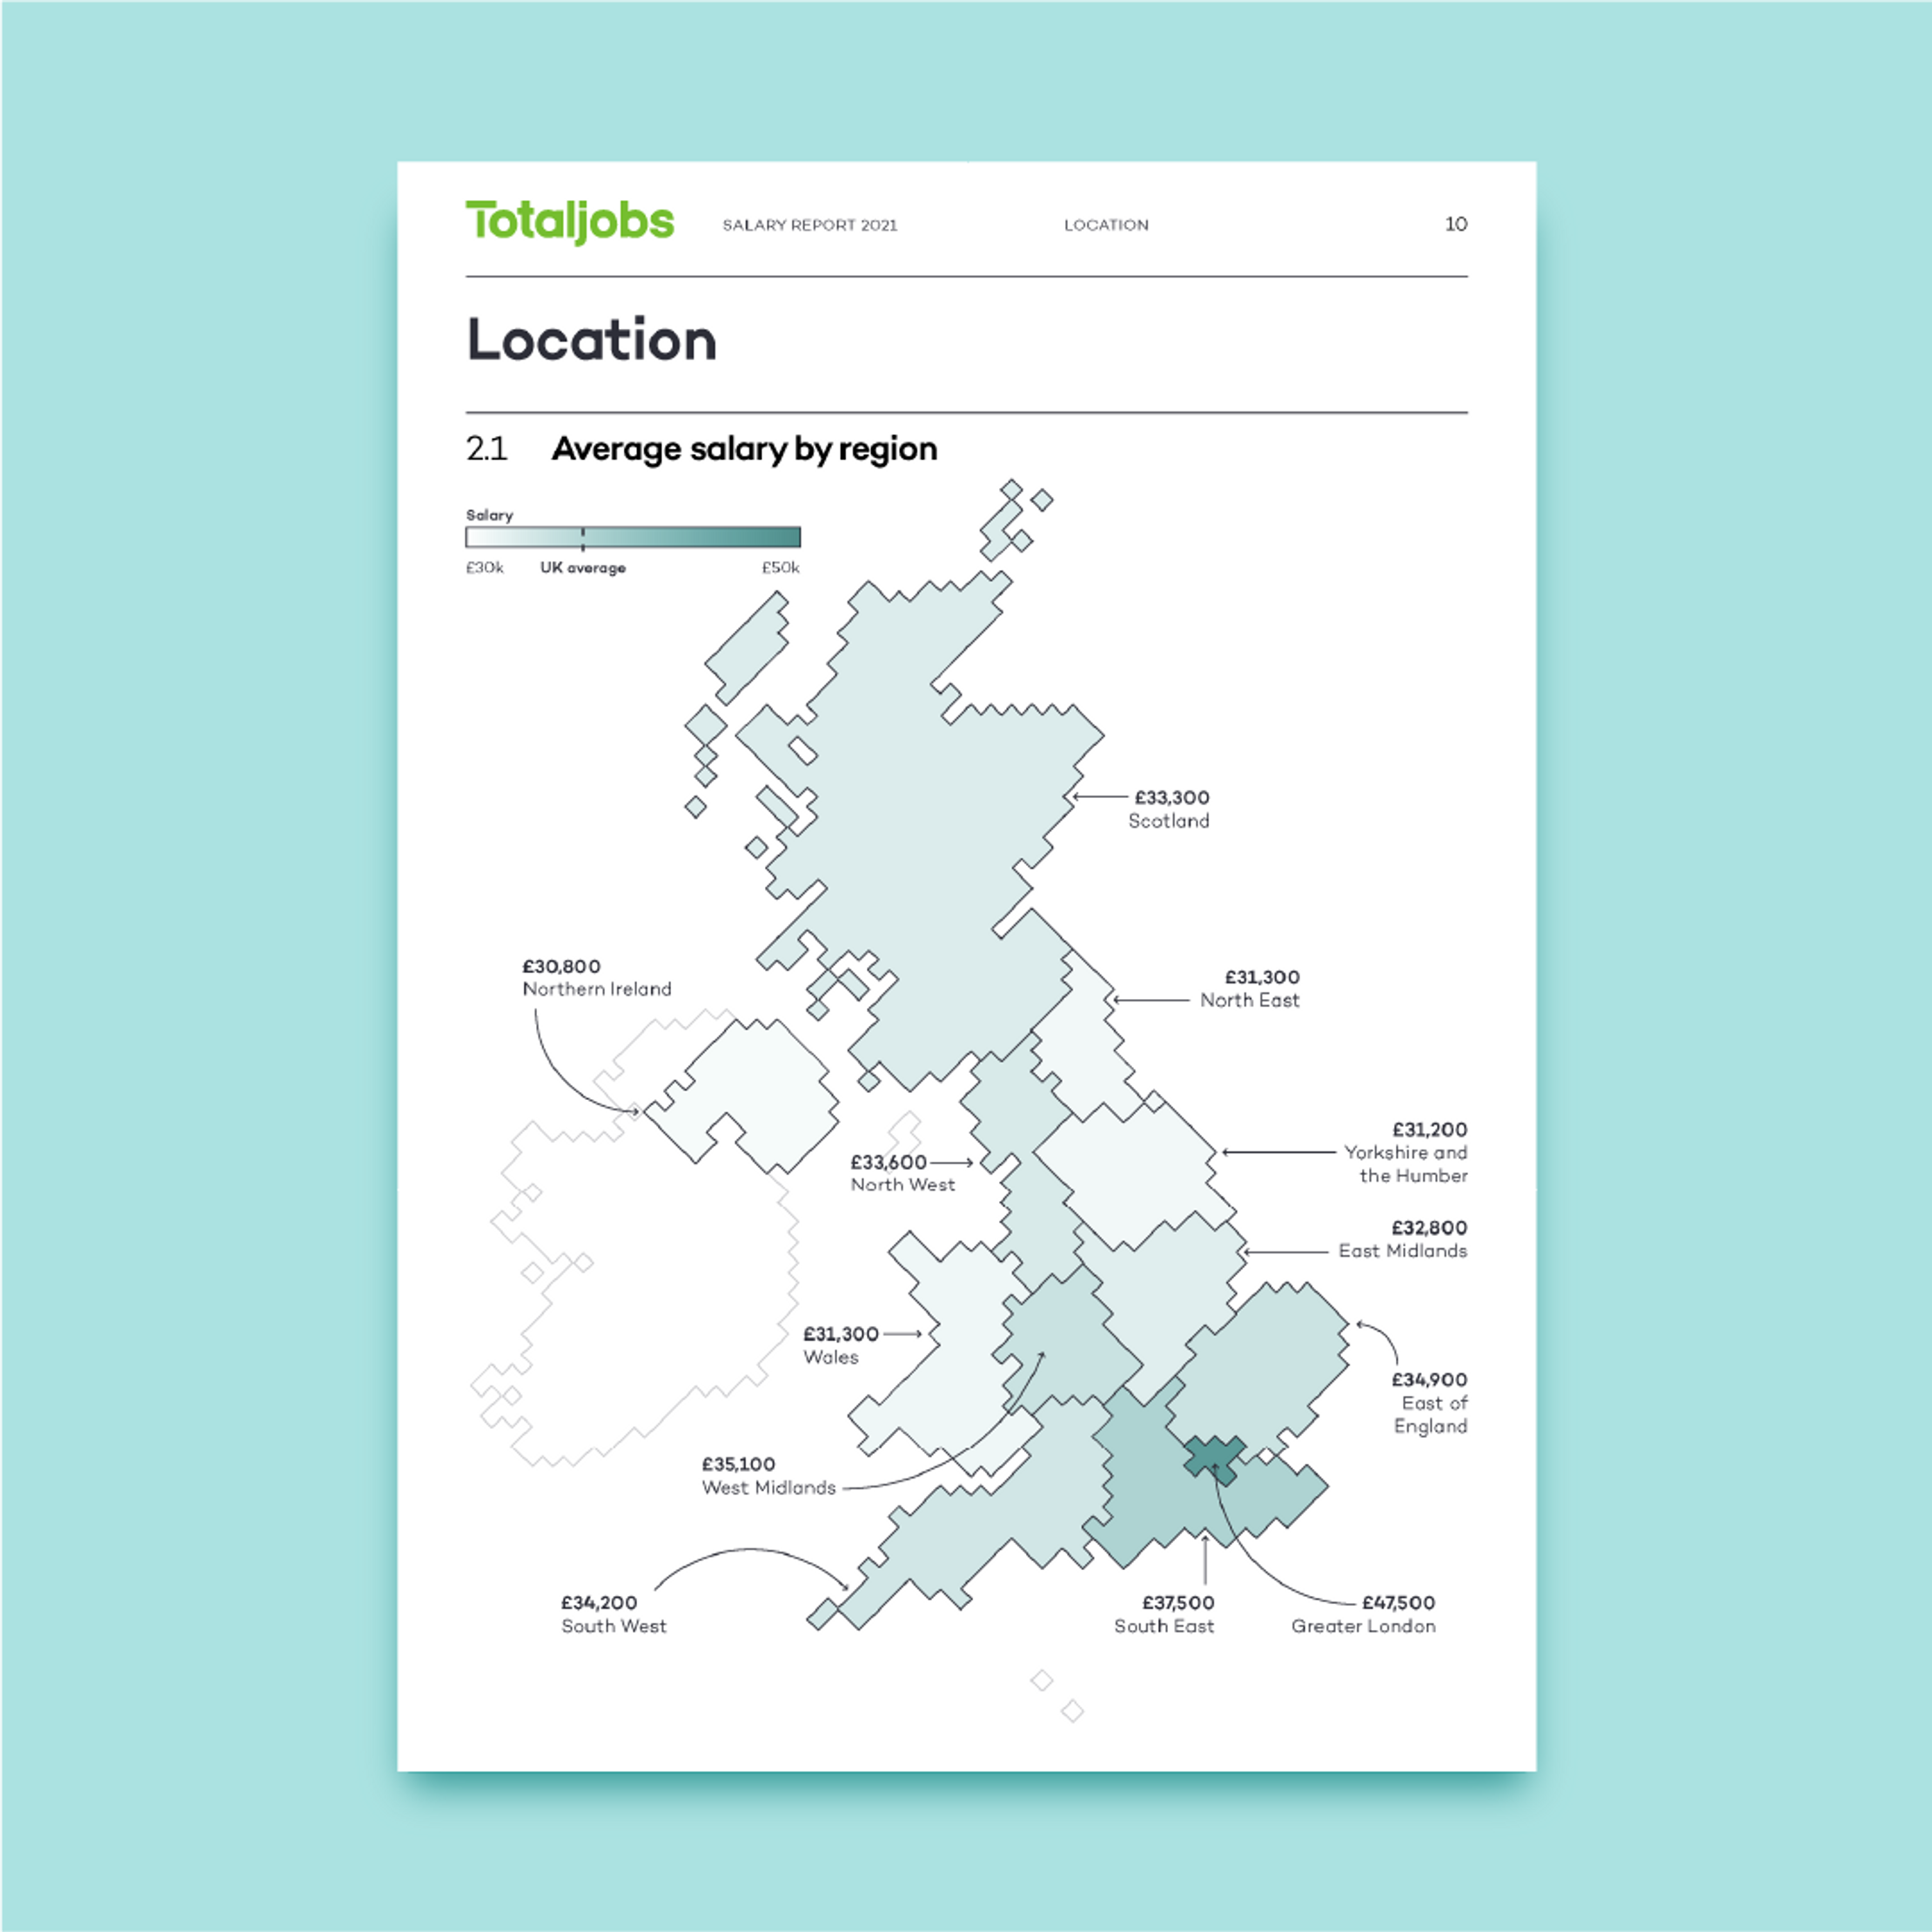 A map from the TotalJobs Salary Report. It shows the mean salary of different parts of the UK, Greater London has the highest at £47,500.